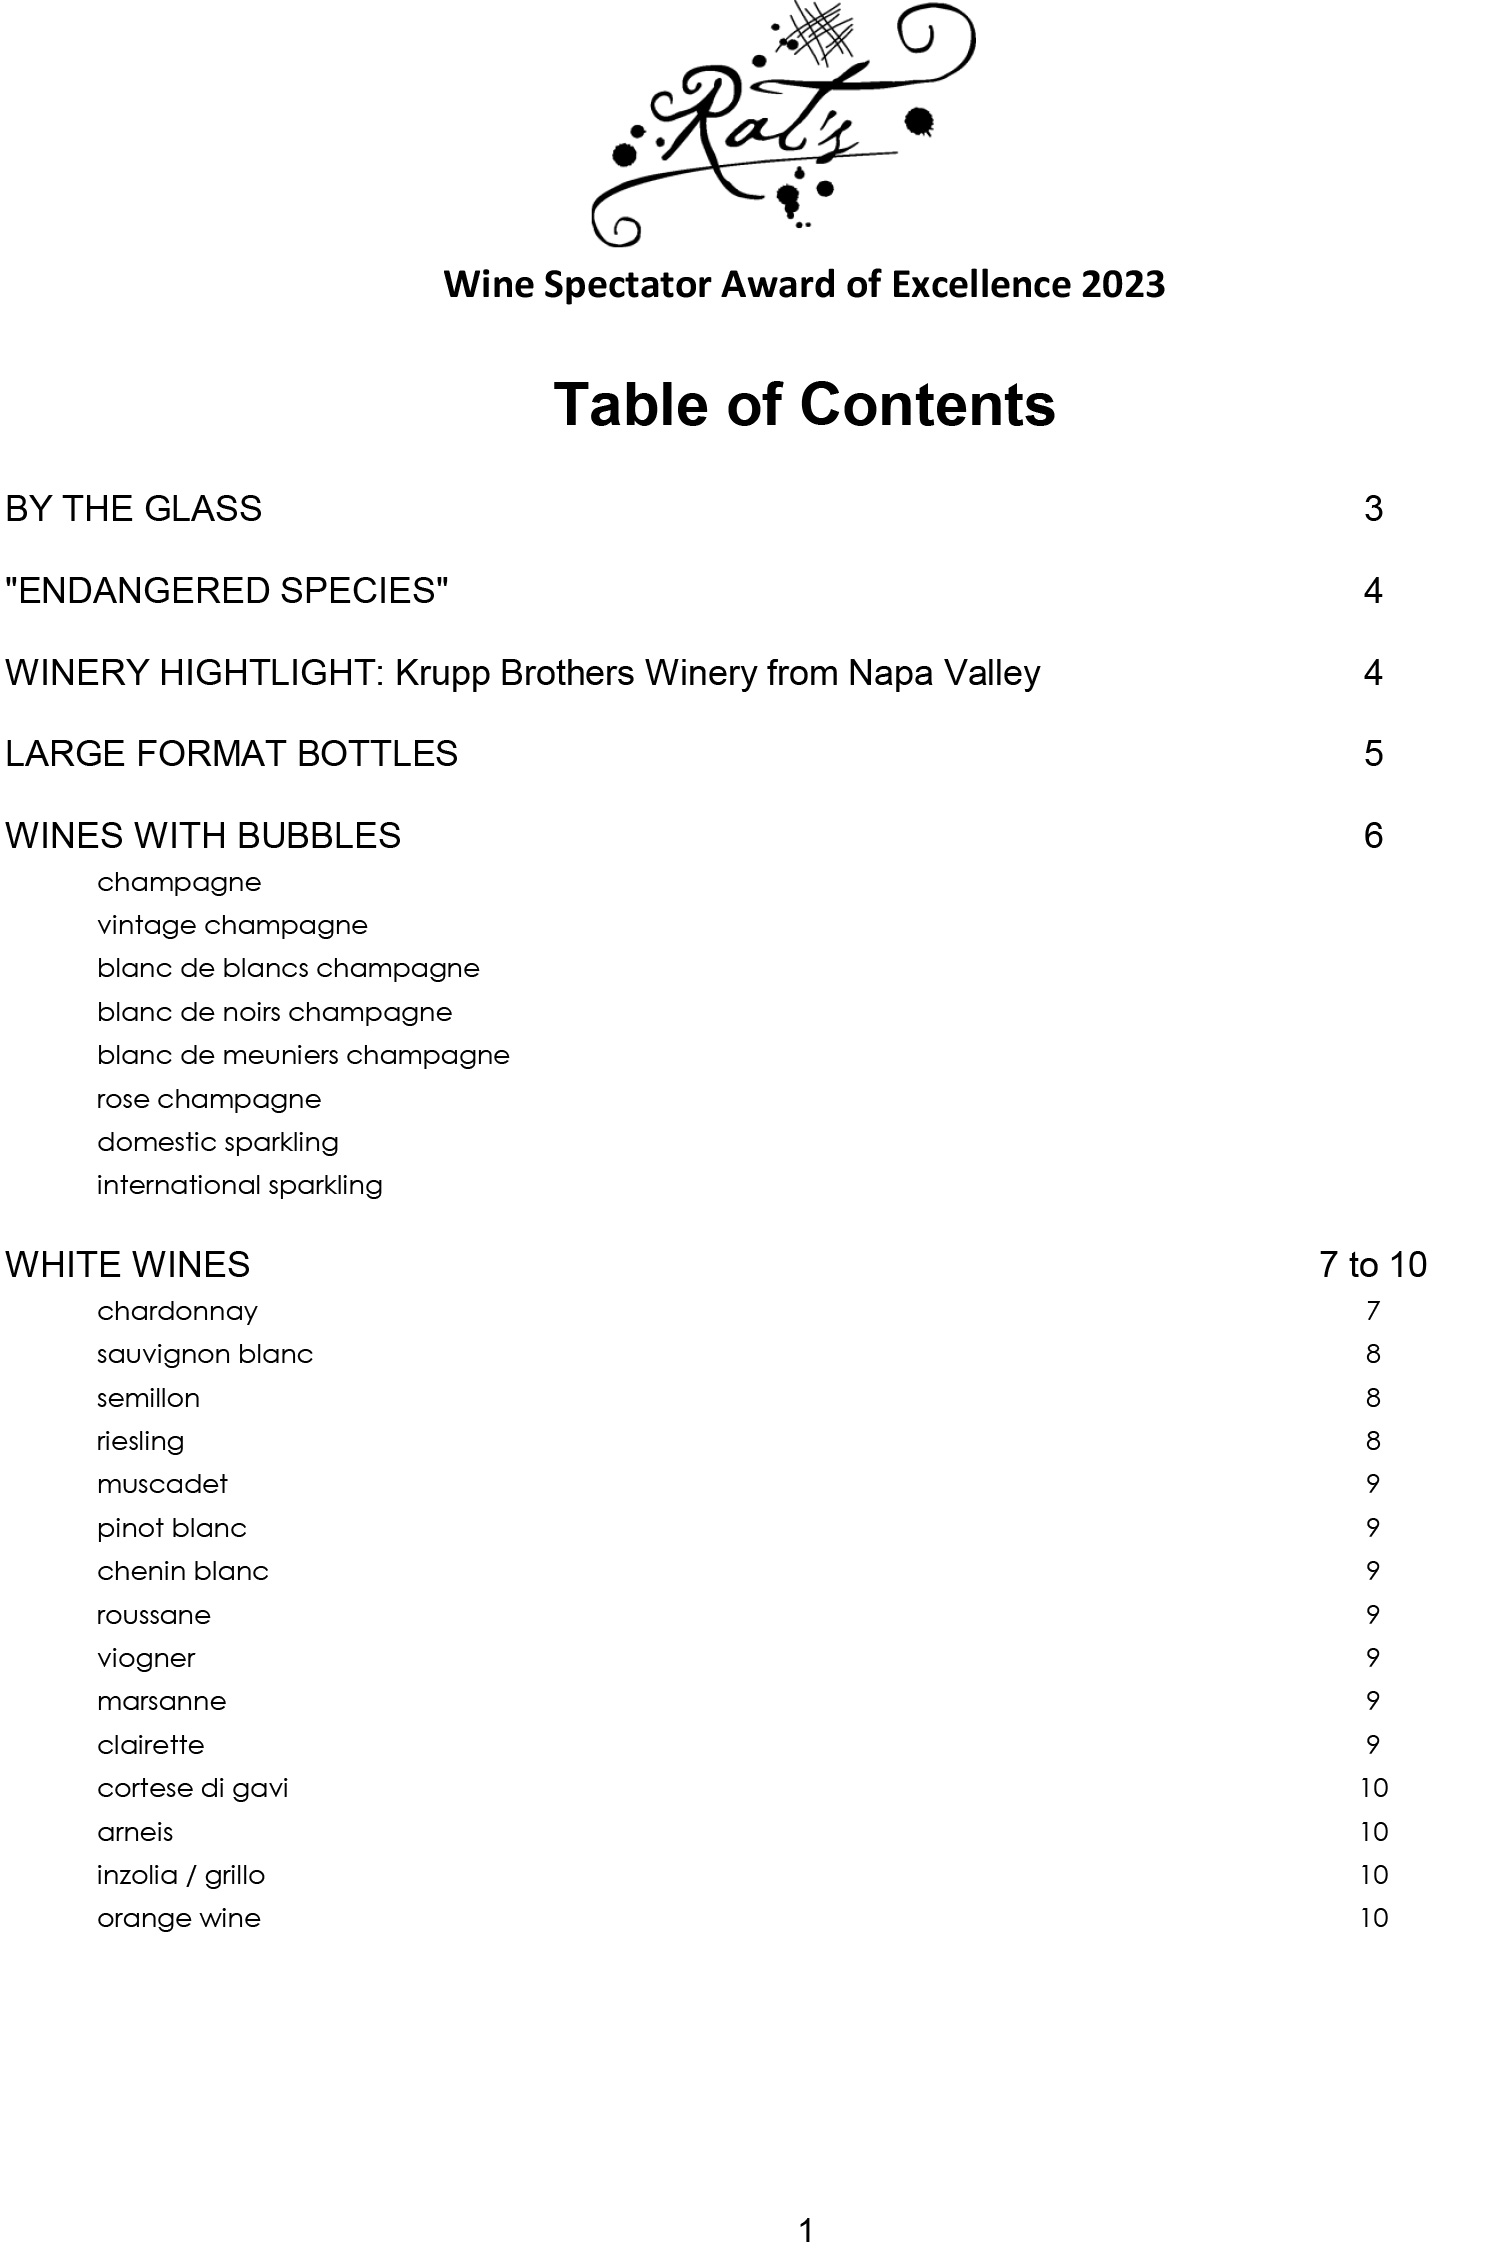 Wine List for Rat's Restaurant - Table of Contents